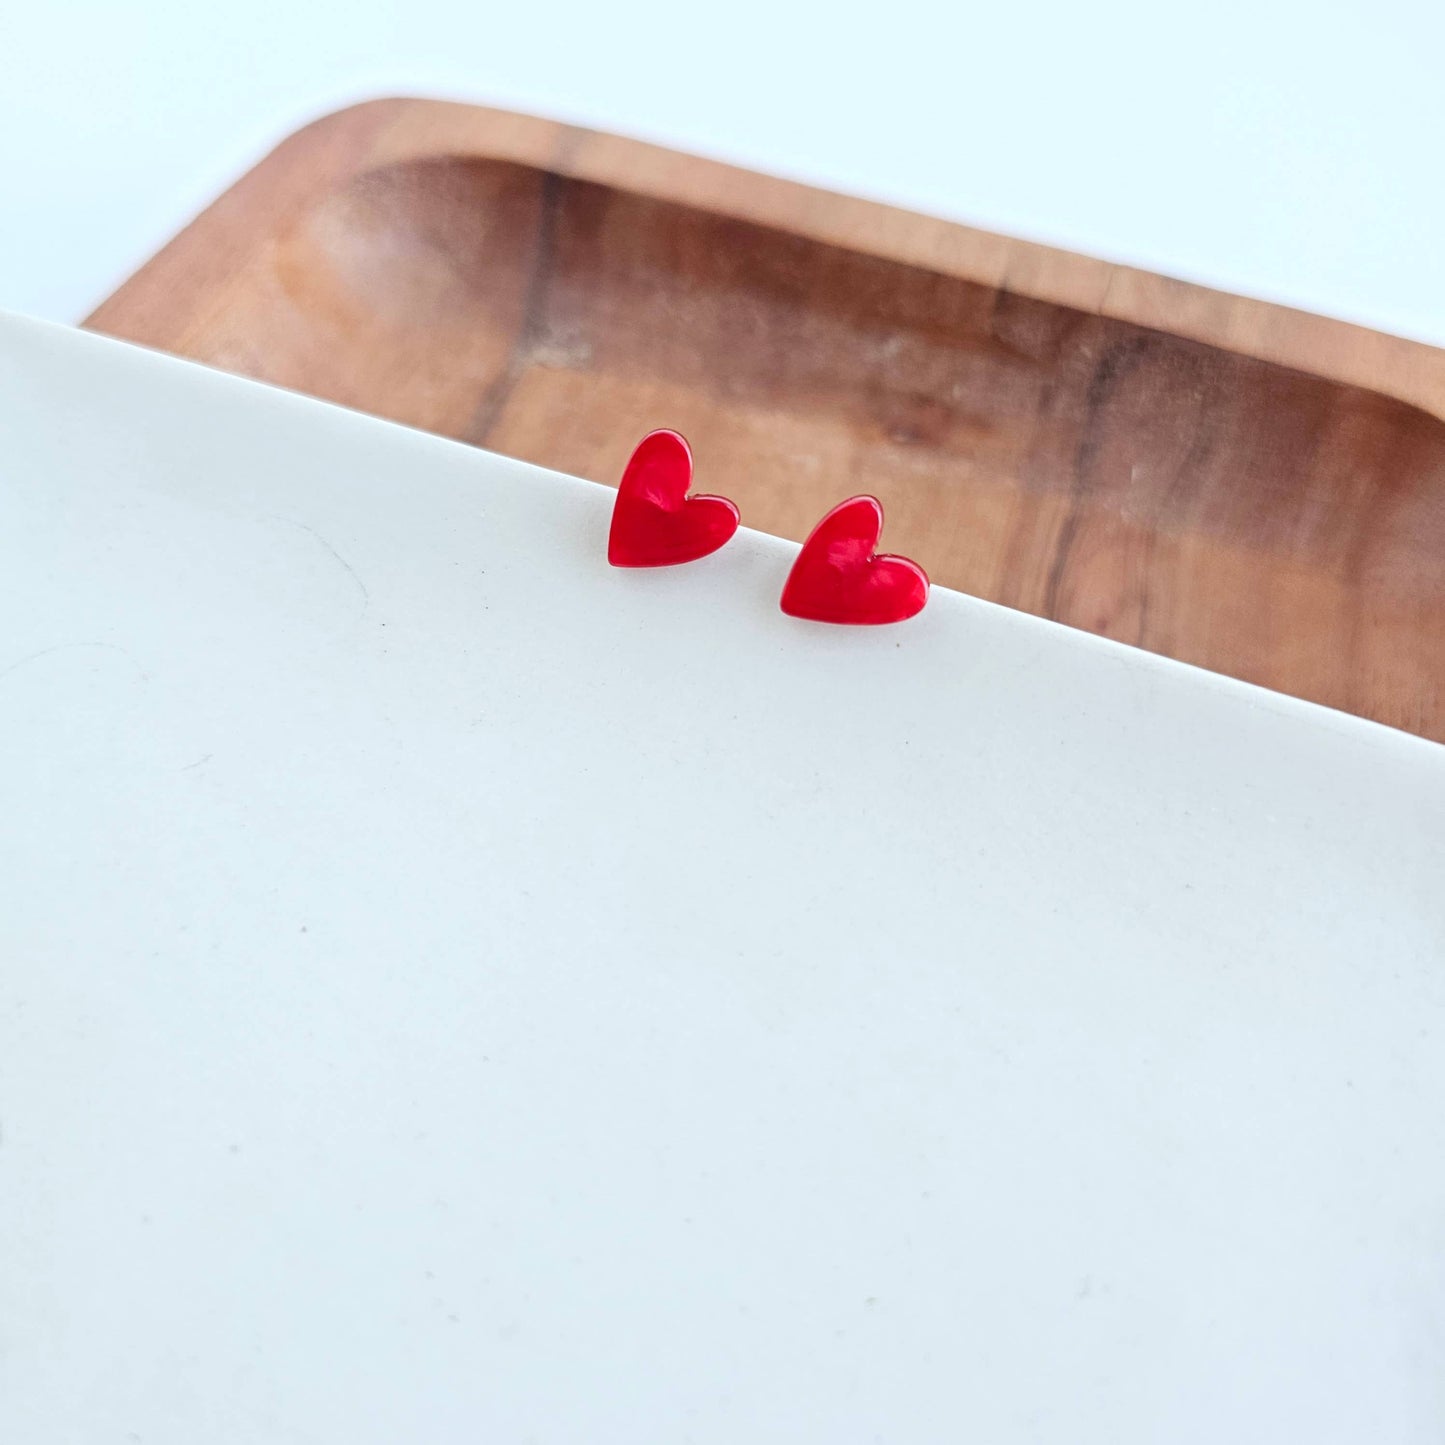 Hand Drawn Heart Studs - Red